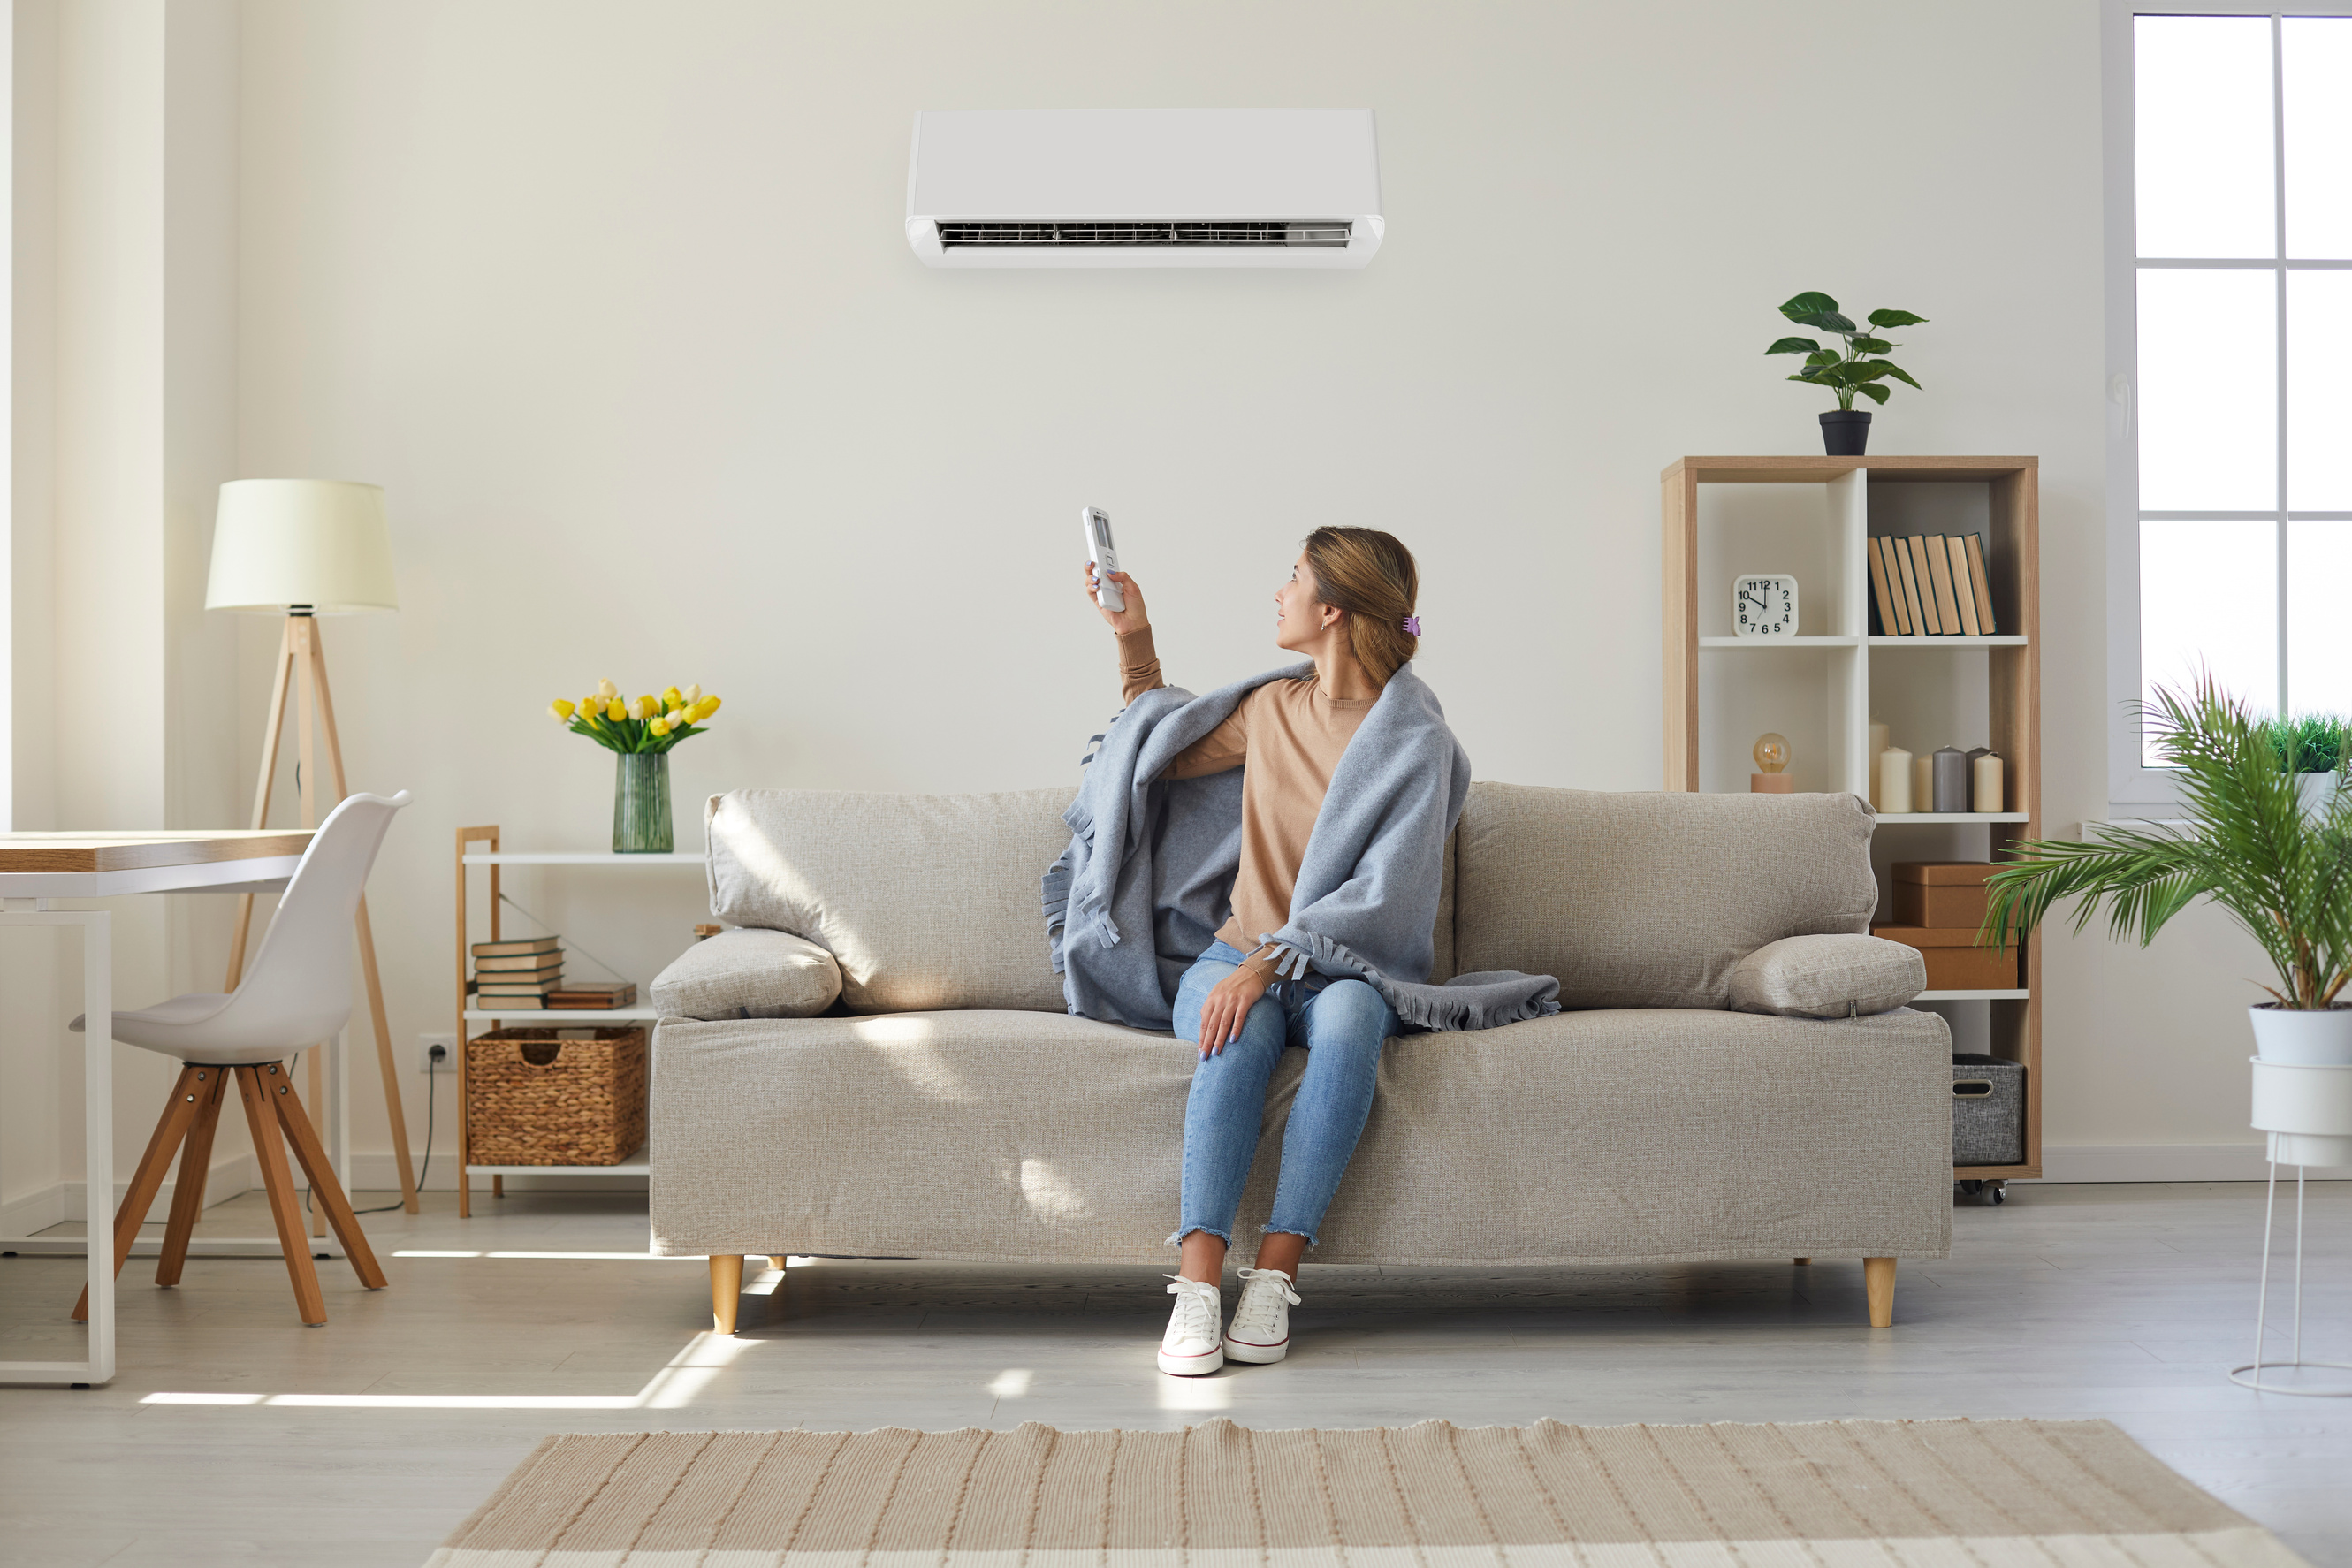 Woman Enjoying Cool Fresh Air in Her Living Room with Air Conditioner on the Wall